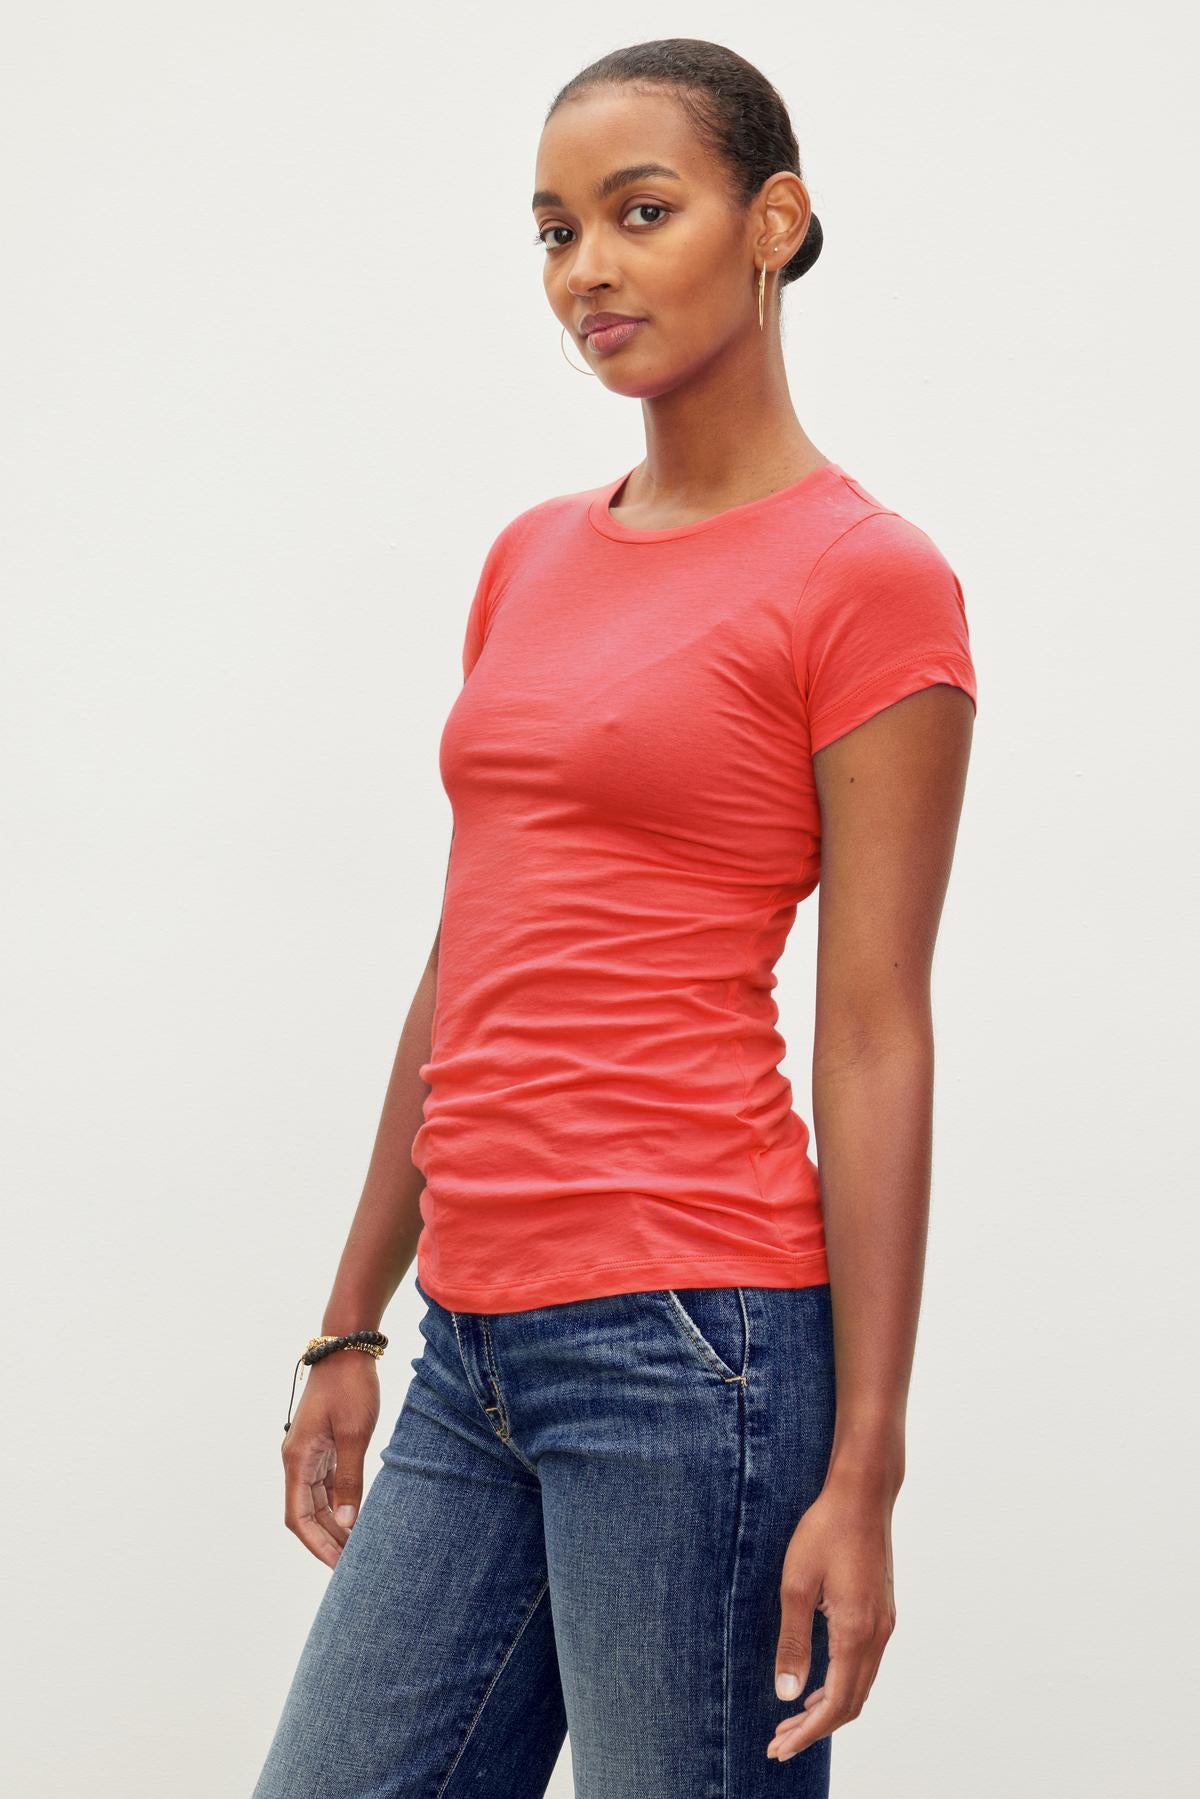   A woman wearing an iconic JEMMA GAUZY WHISPER FITTED CREW NECK TEE in red by Velvet by Graham & Spencer. 